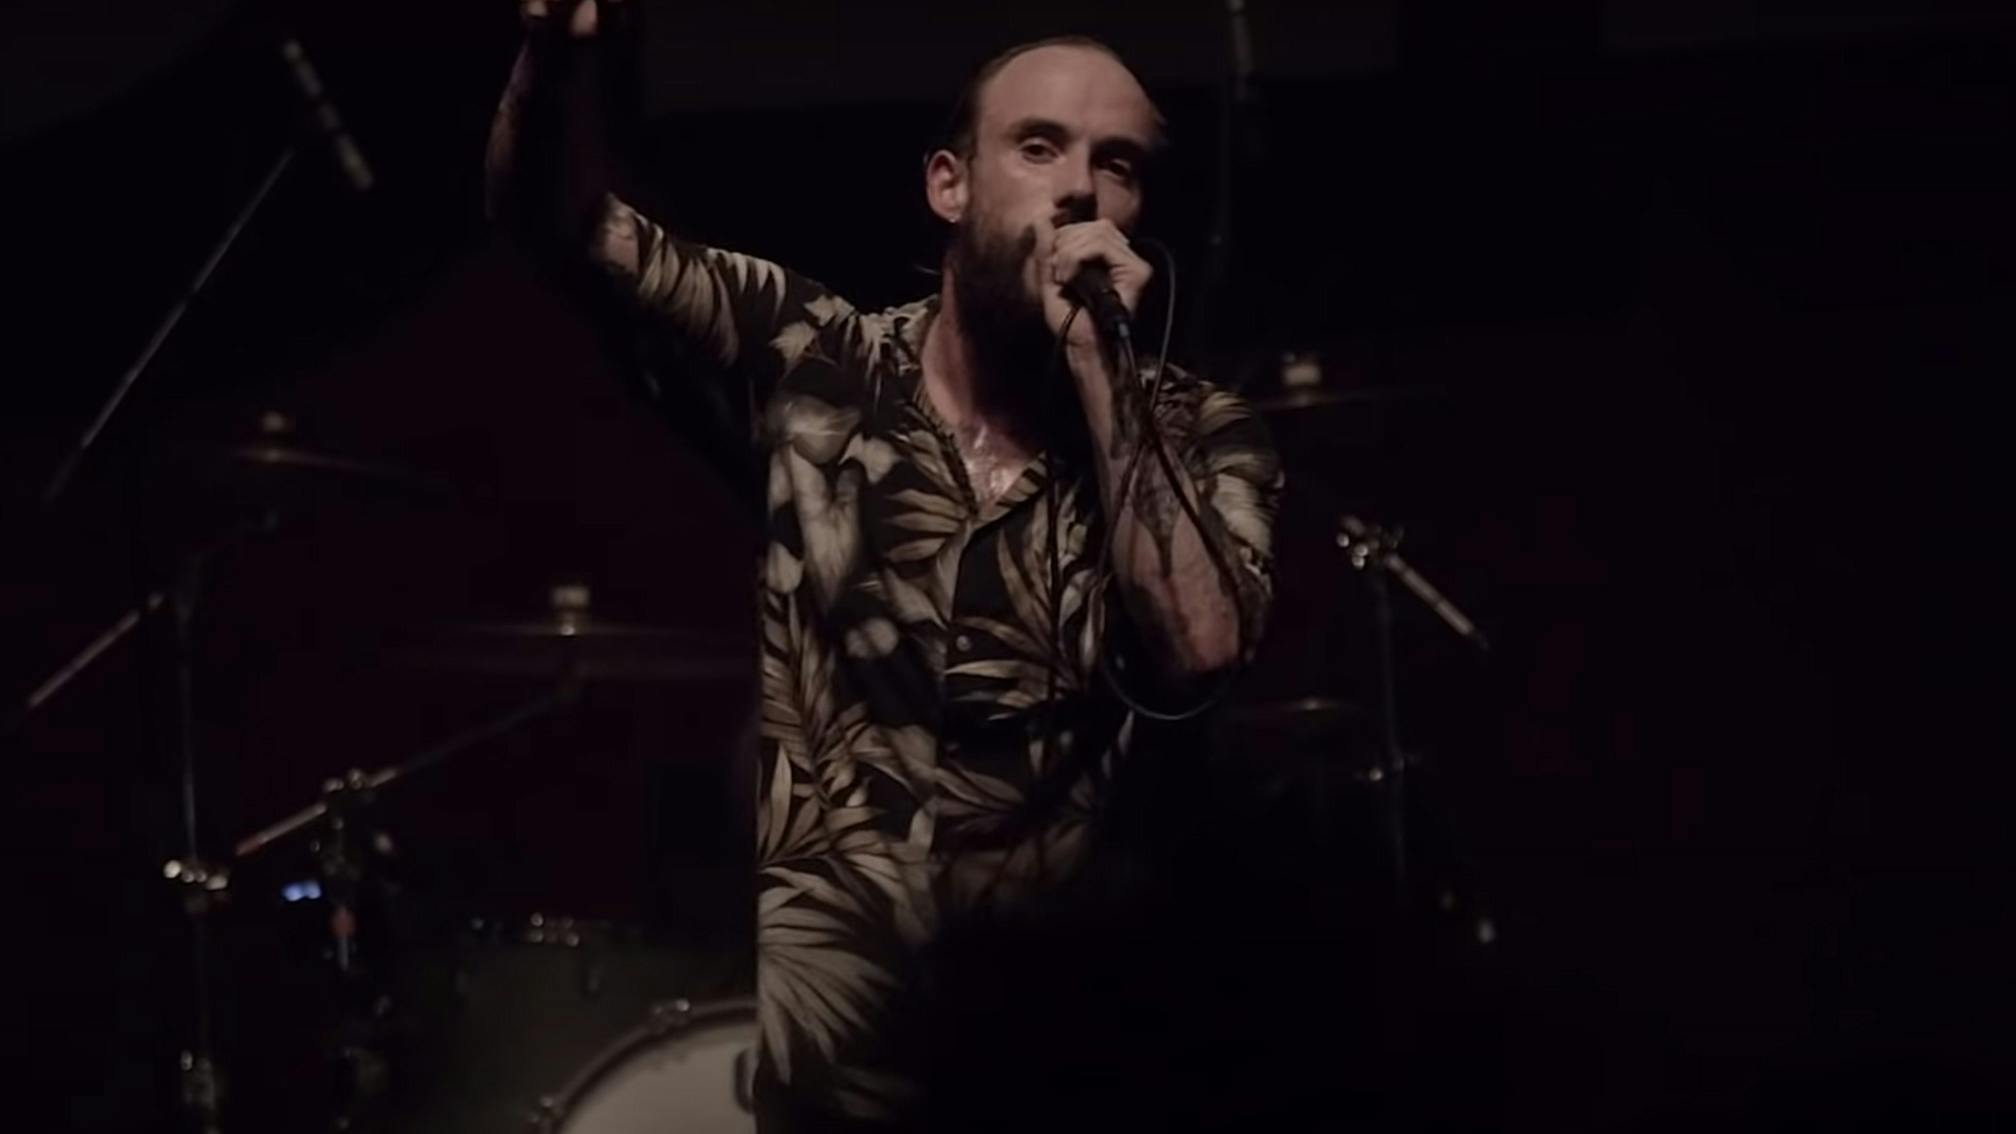 Watch IDLES' Full Live Set From Le Bataclan In Paris